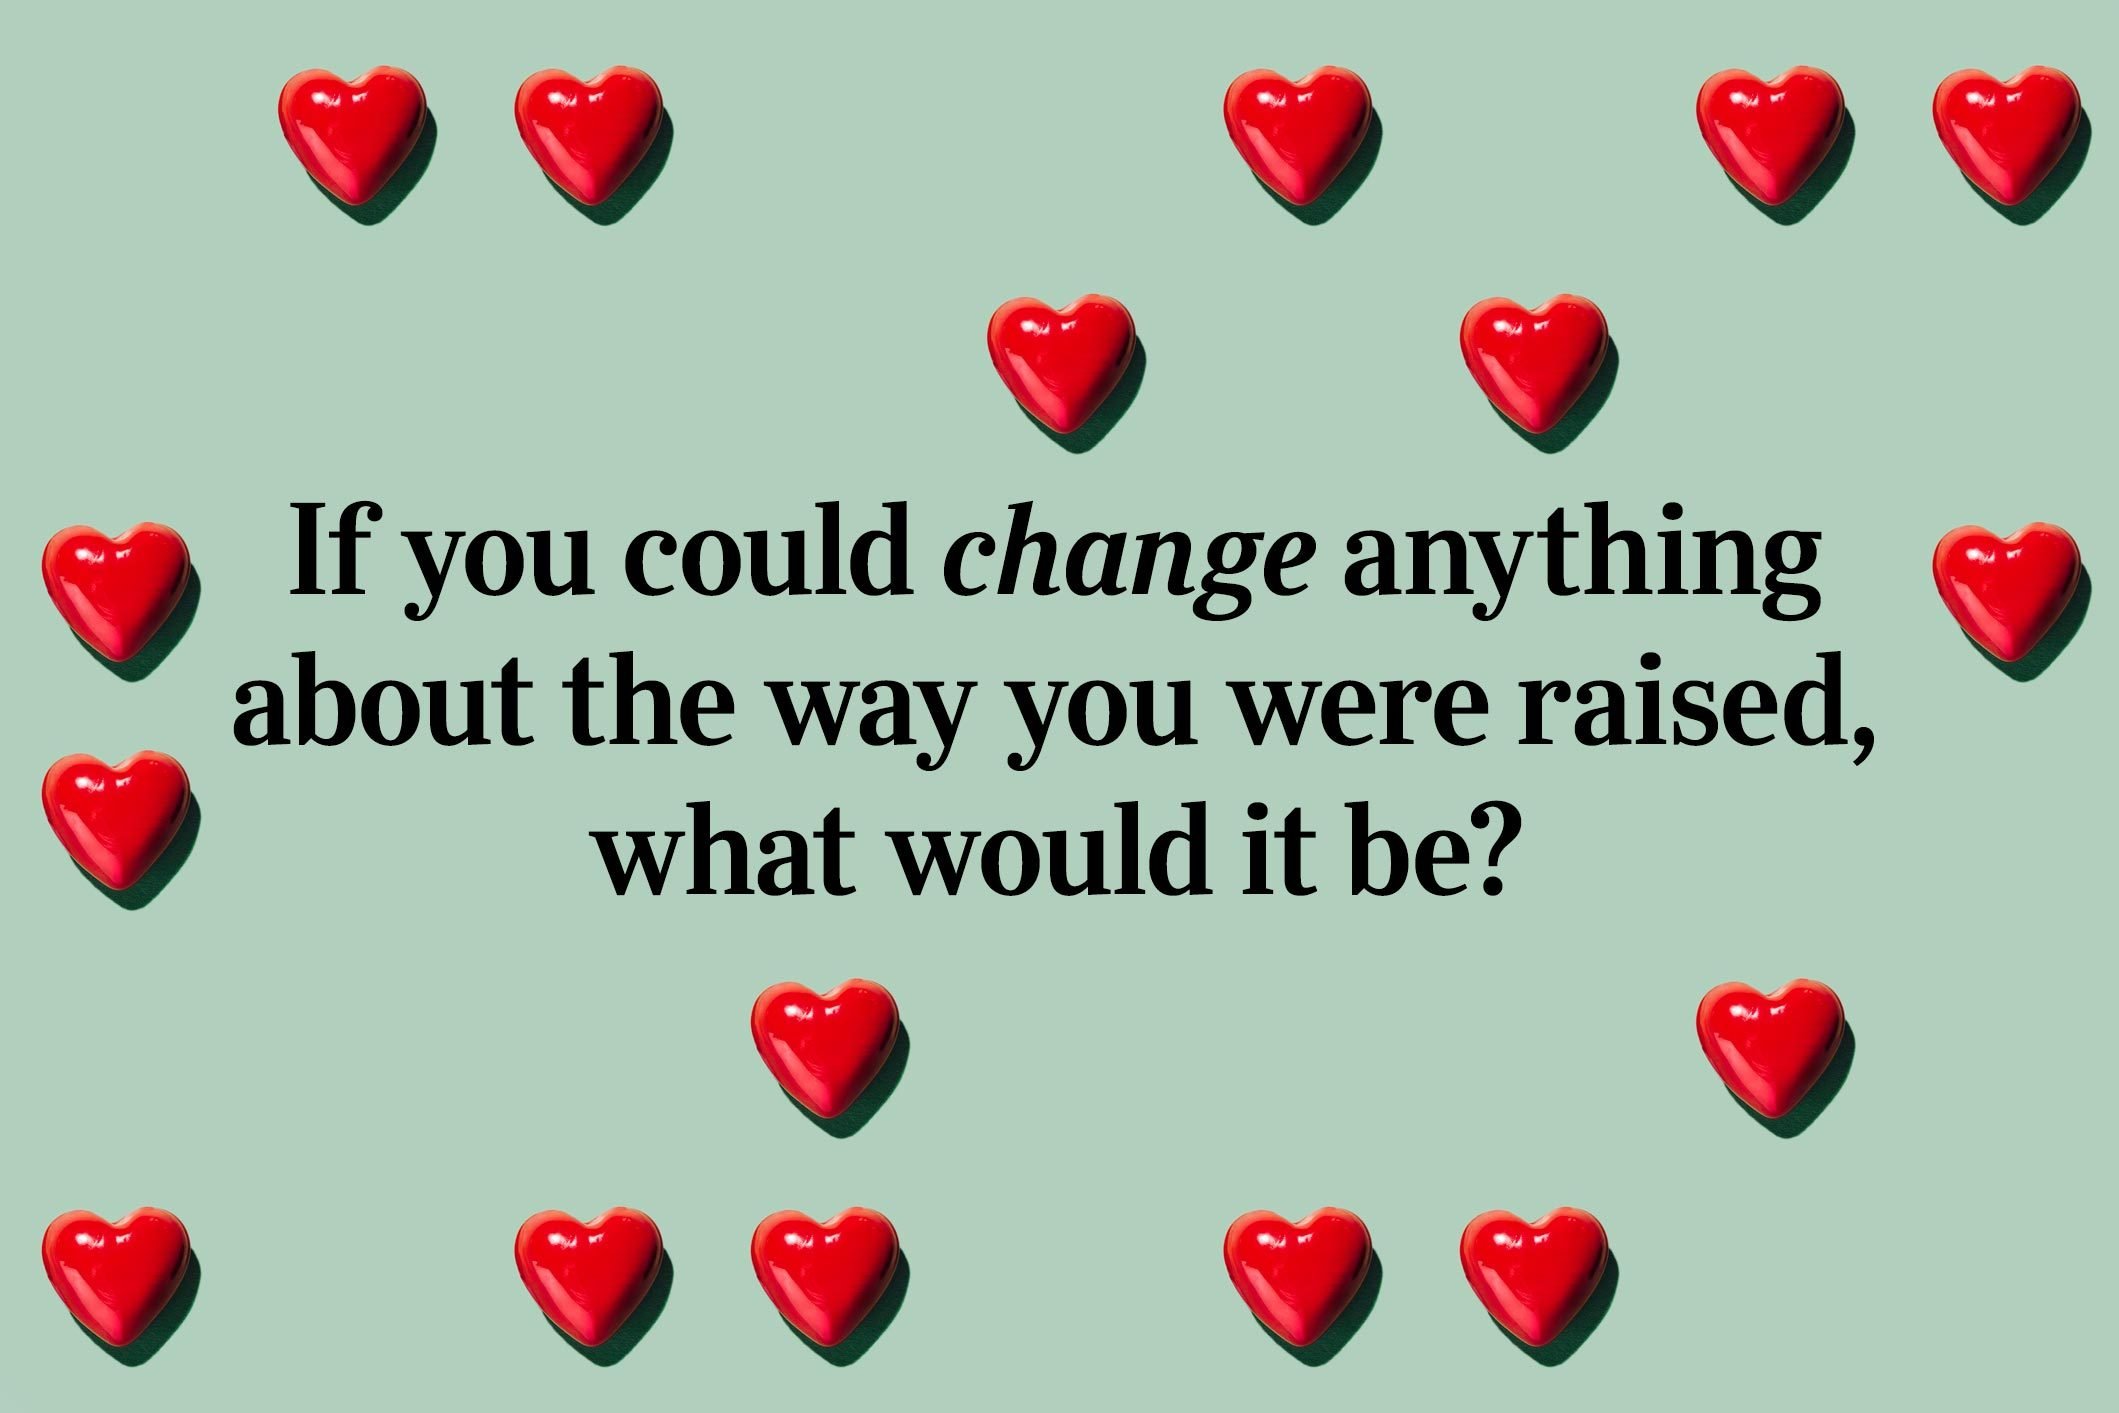 <p>If you could change anything about the way you were raised, what would it be?</p>